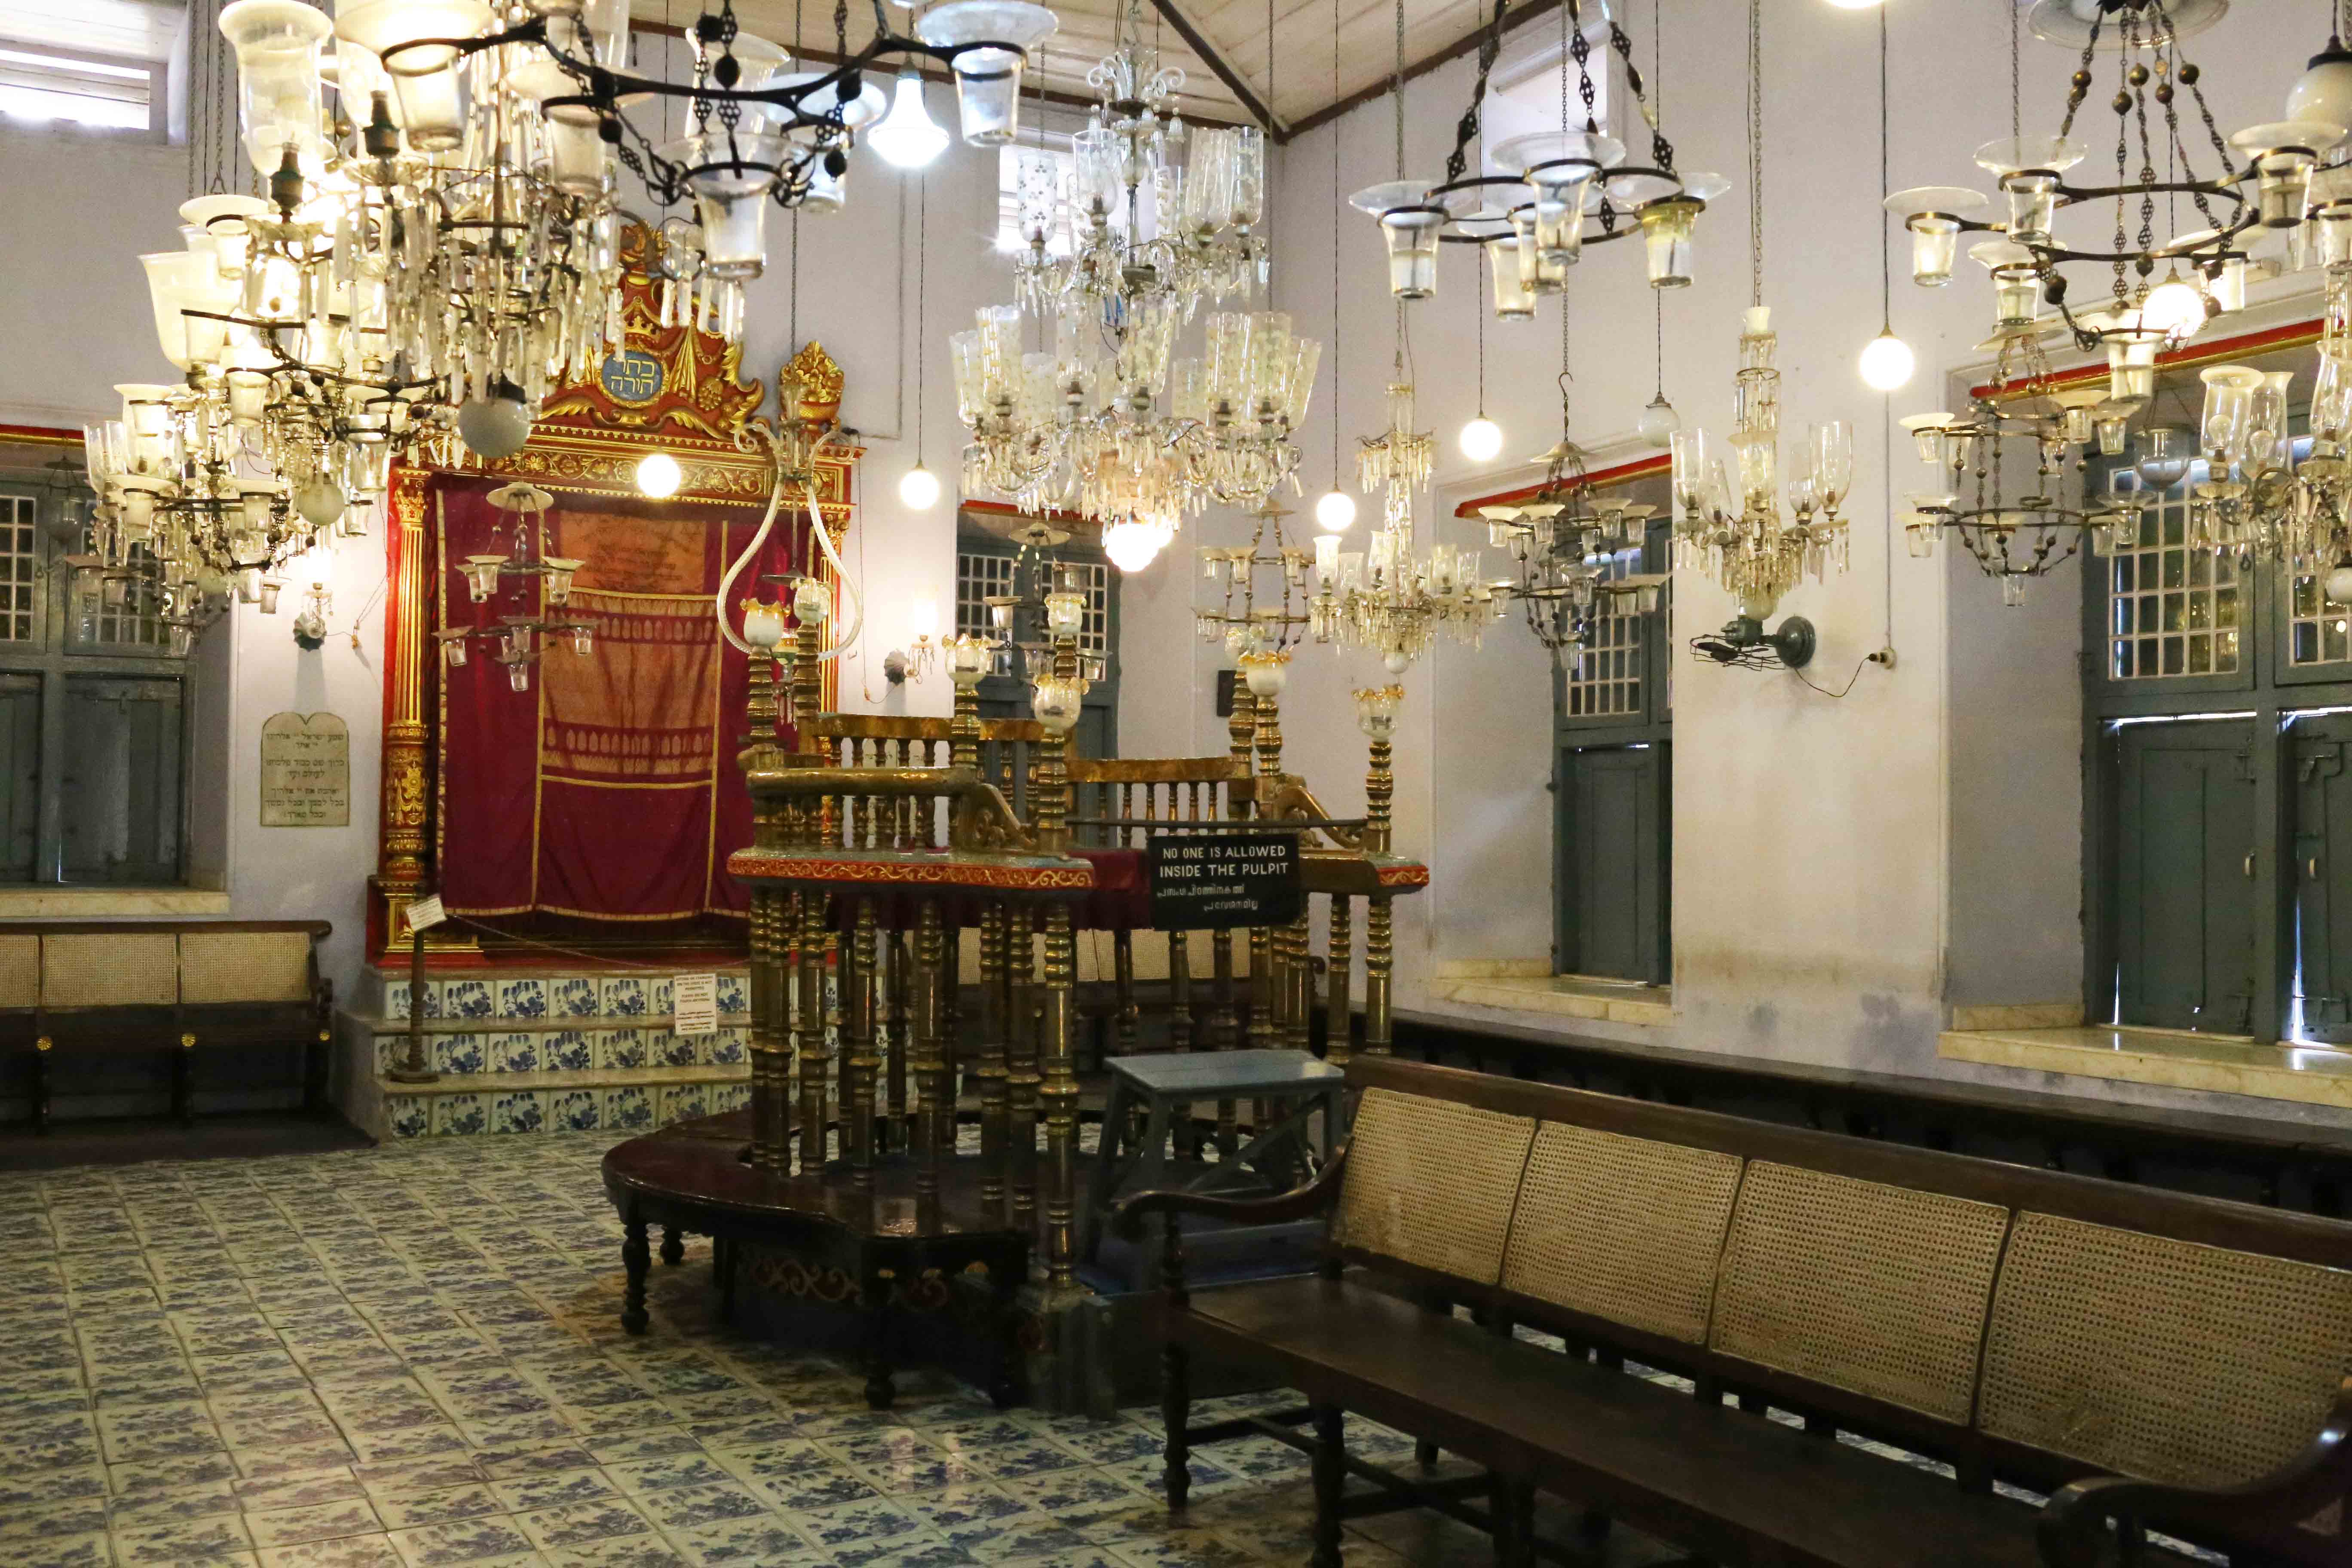 City Monument - Paradesi Synagogue, Jew Town, Cochin